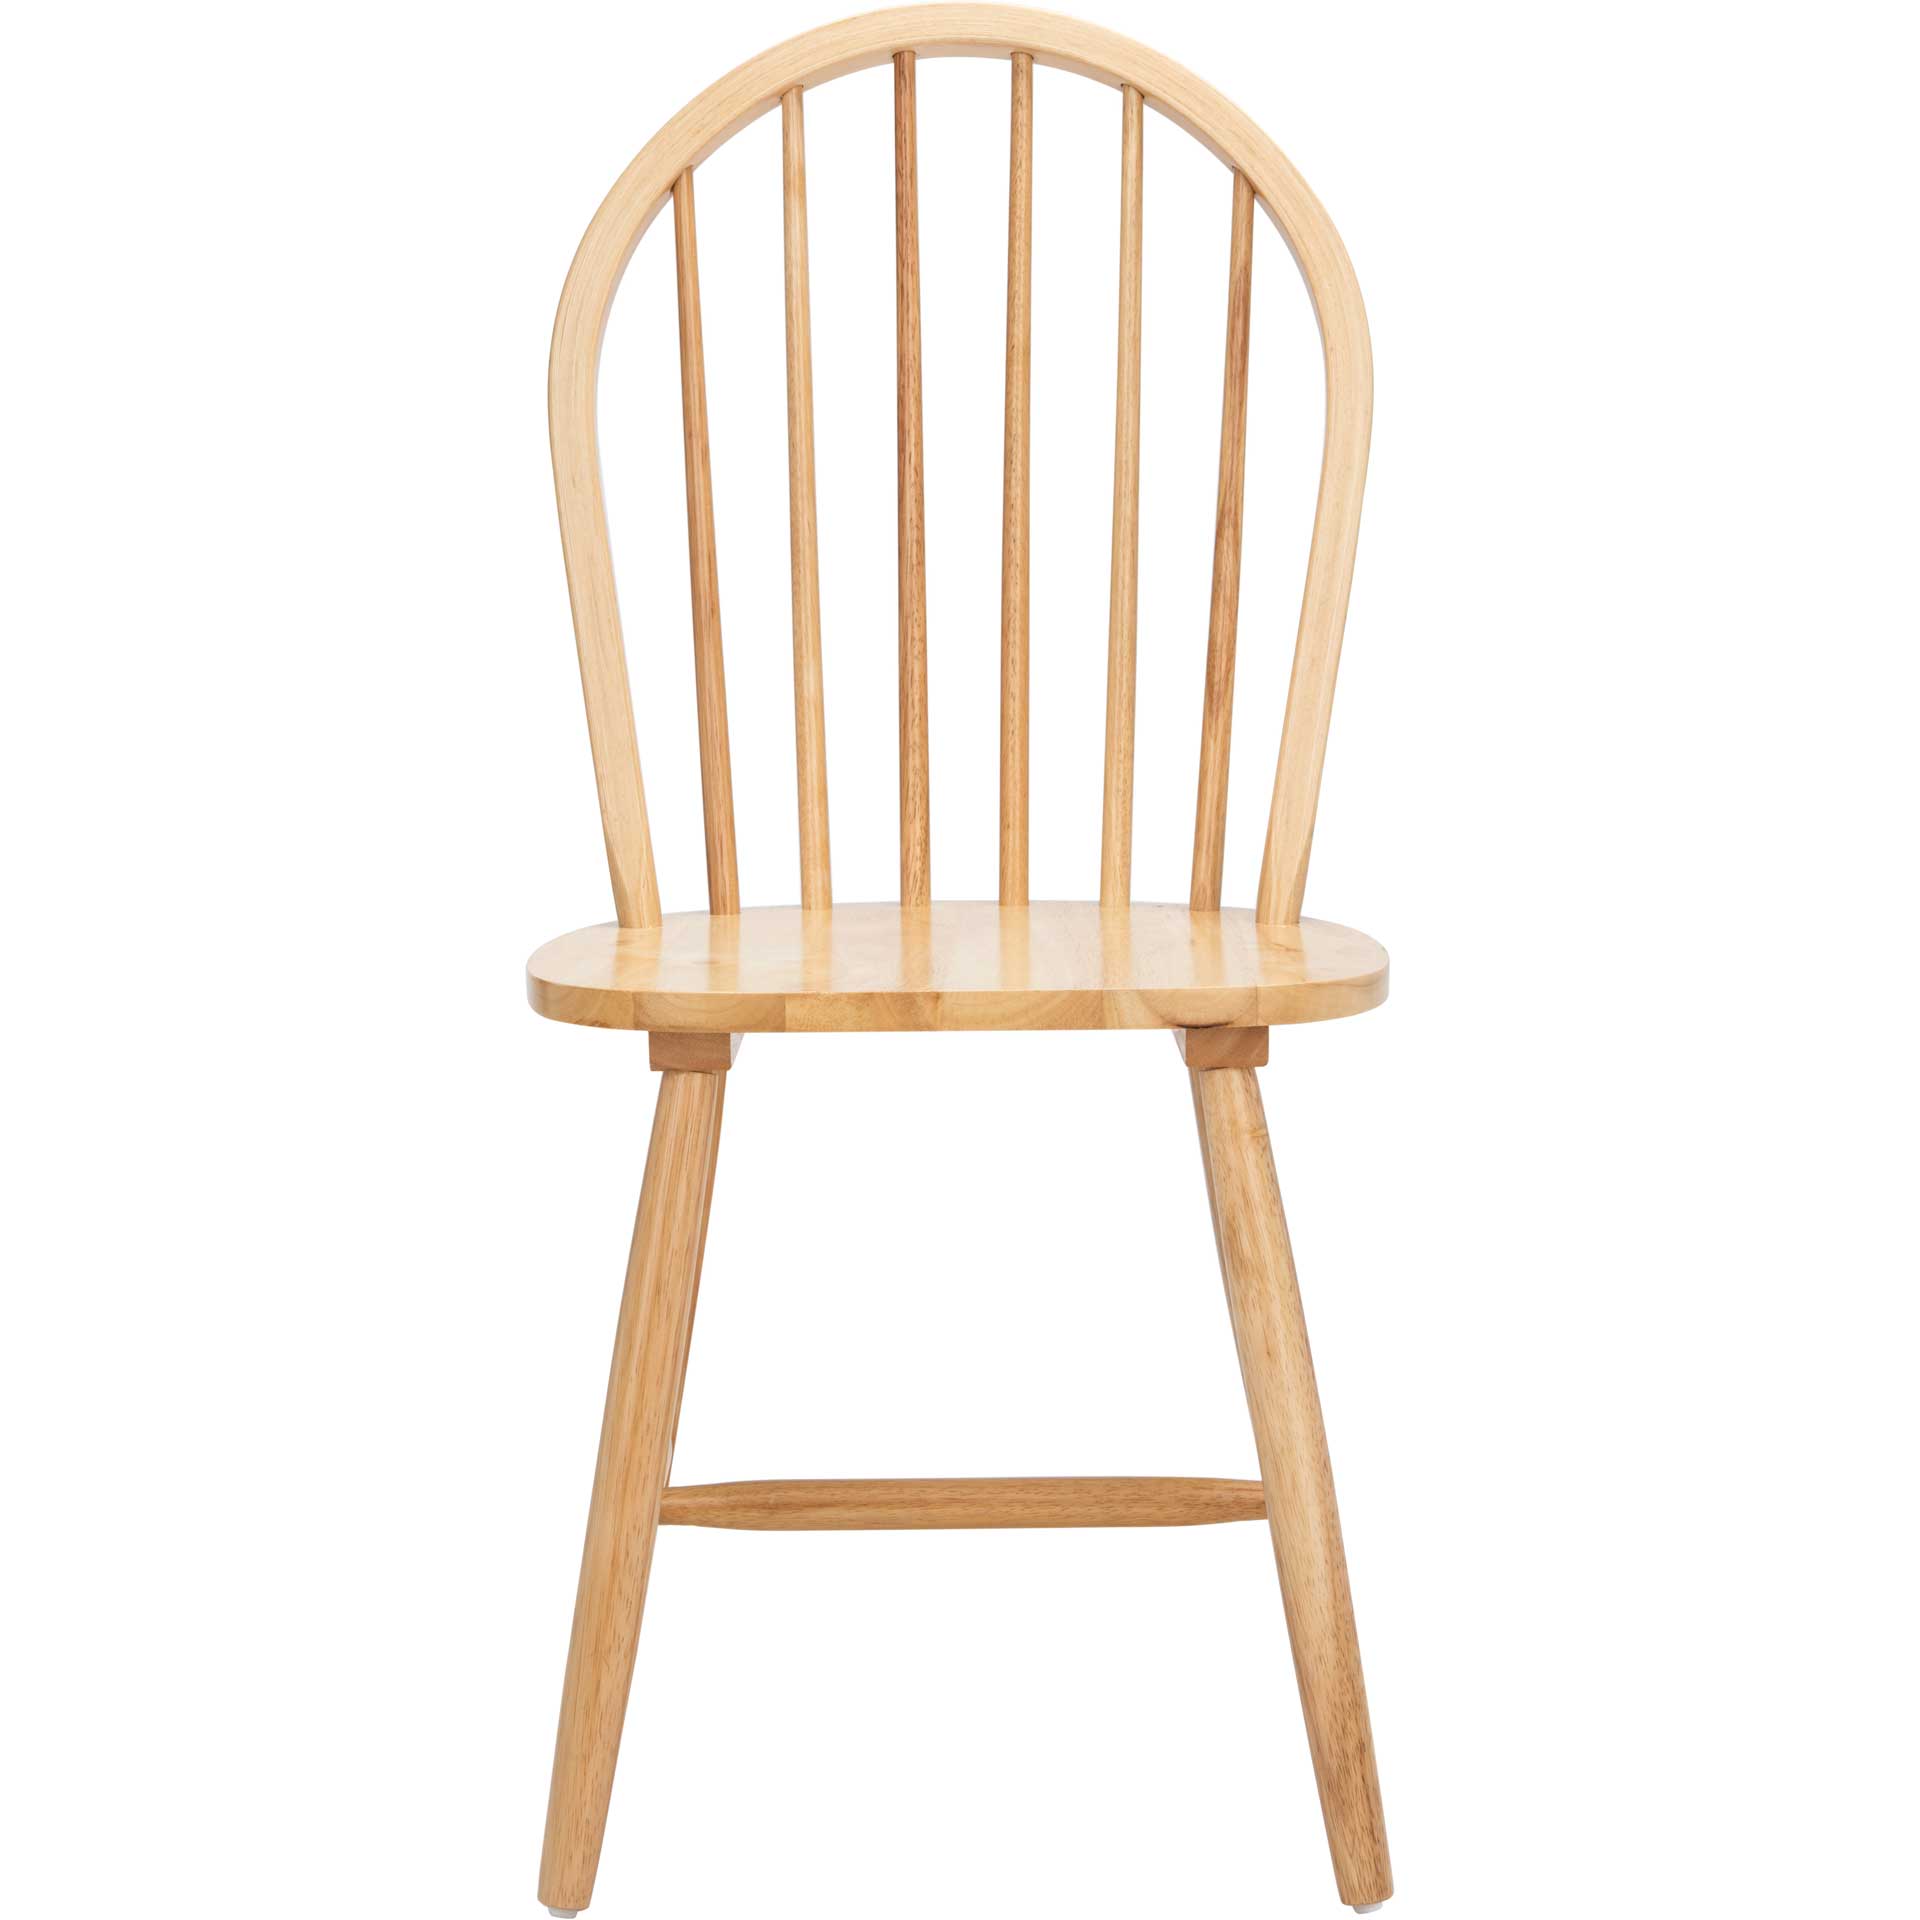 Calista Spindle Back Chair Natural (Set of 2)